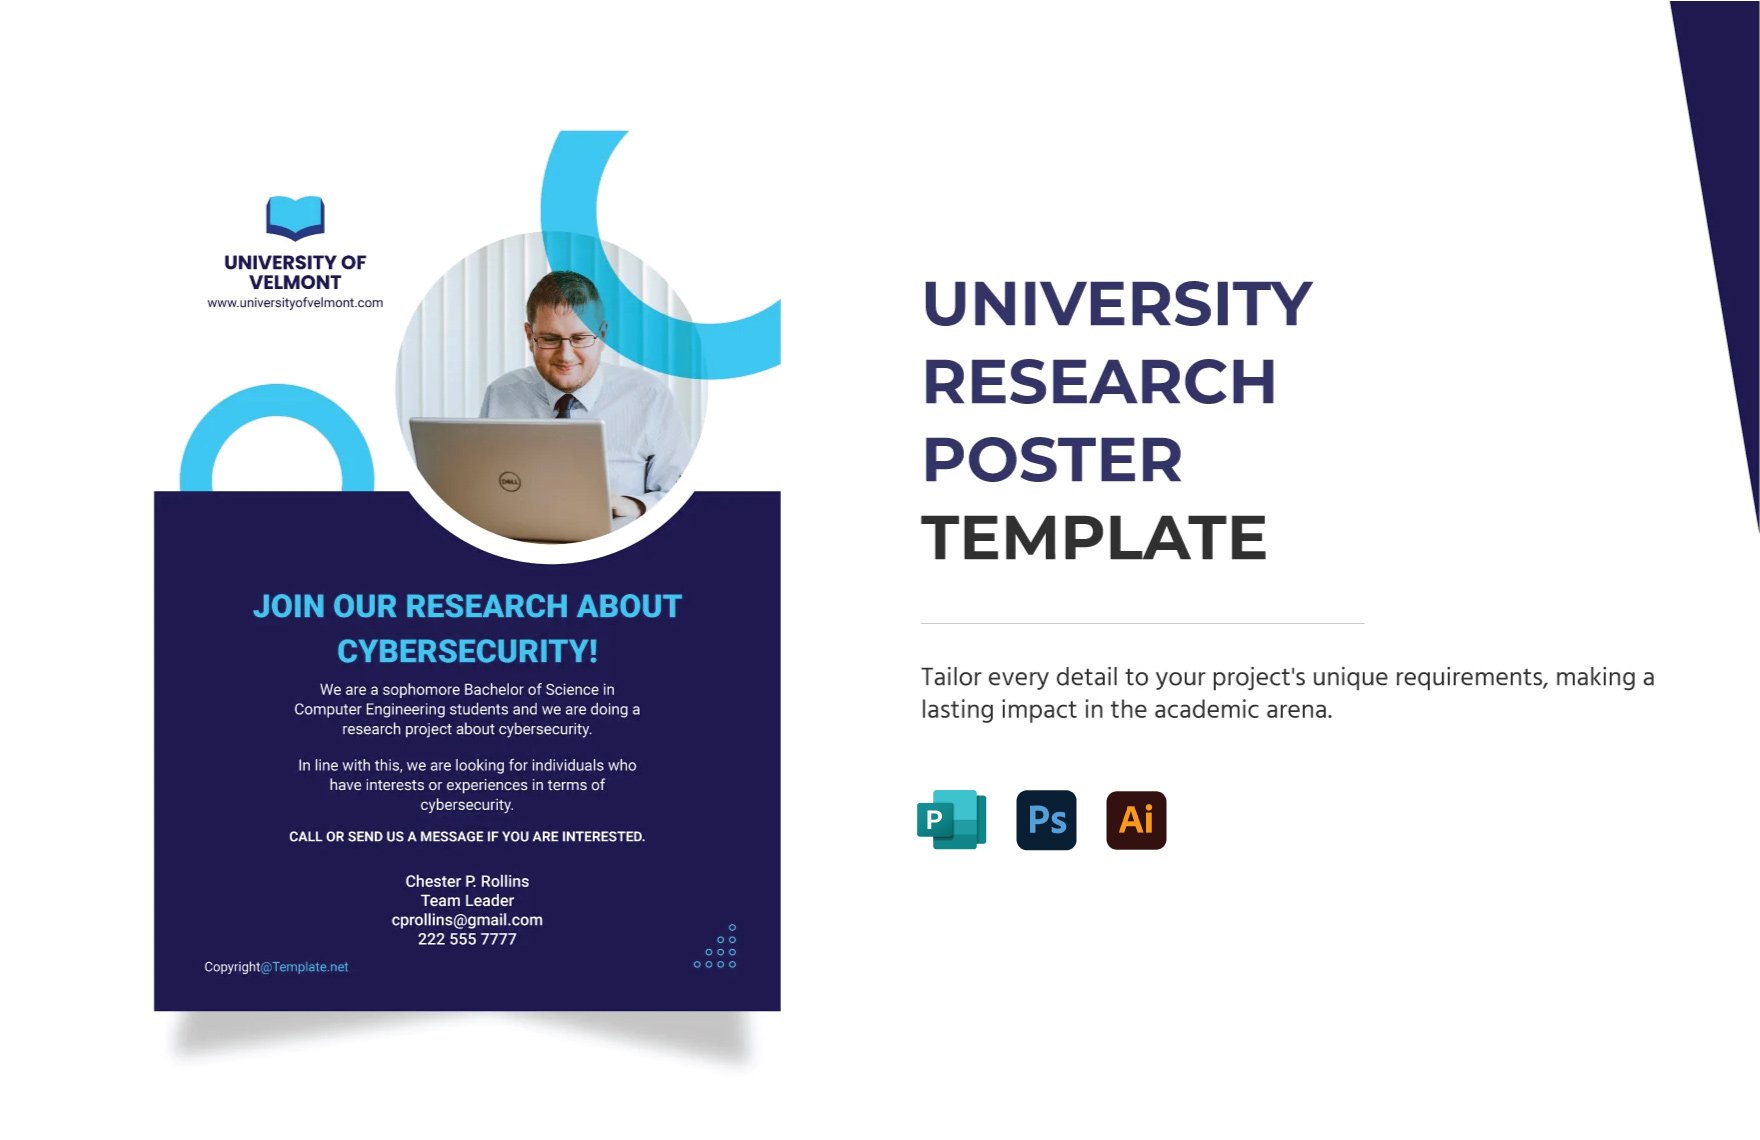 University Research Poster Template